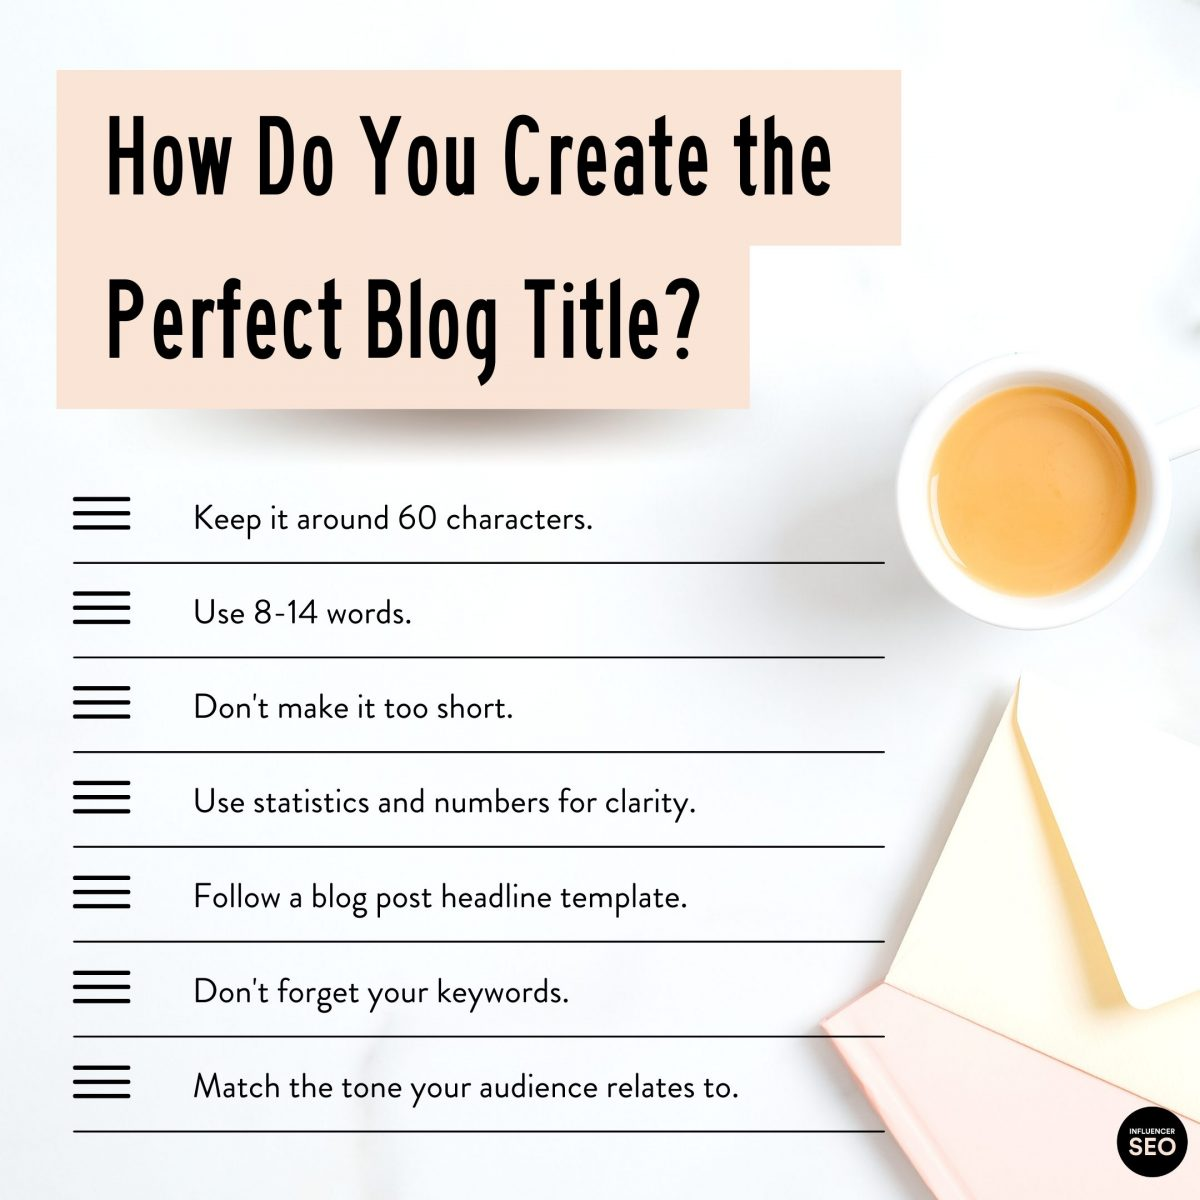 How Do You Create the Perfect compelling Blog Title?